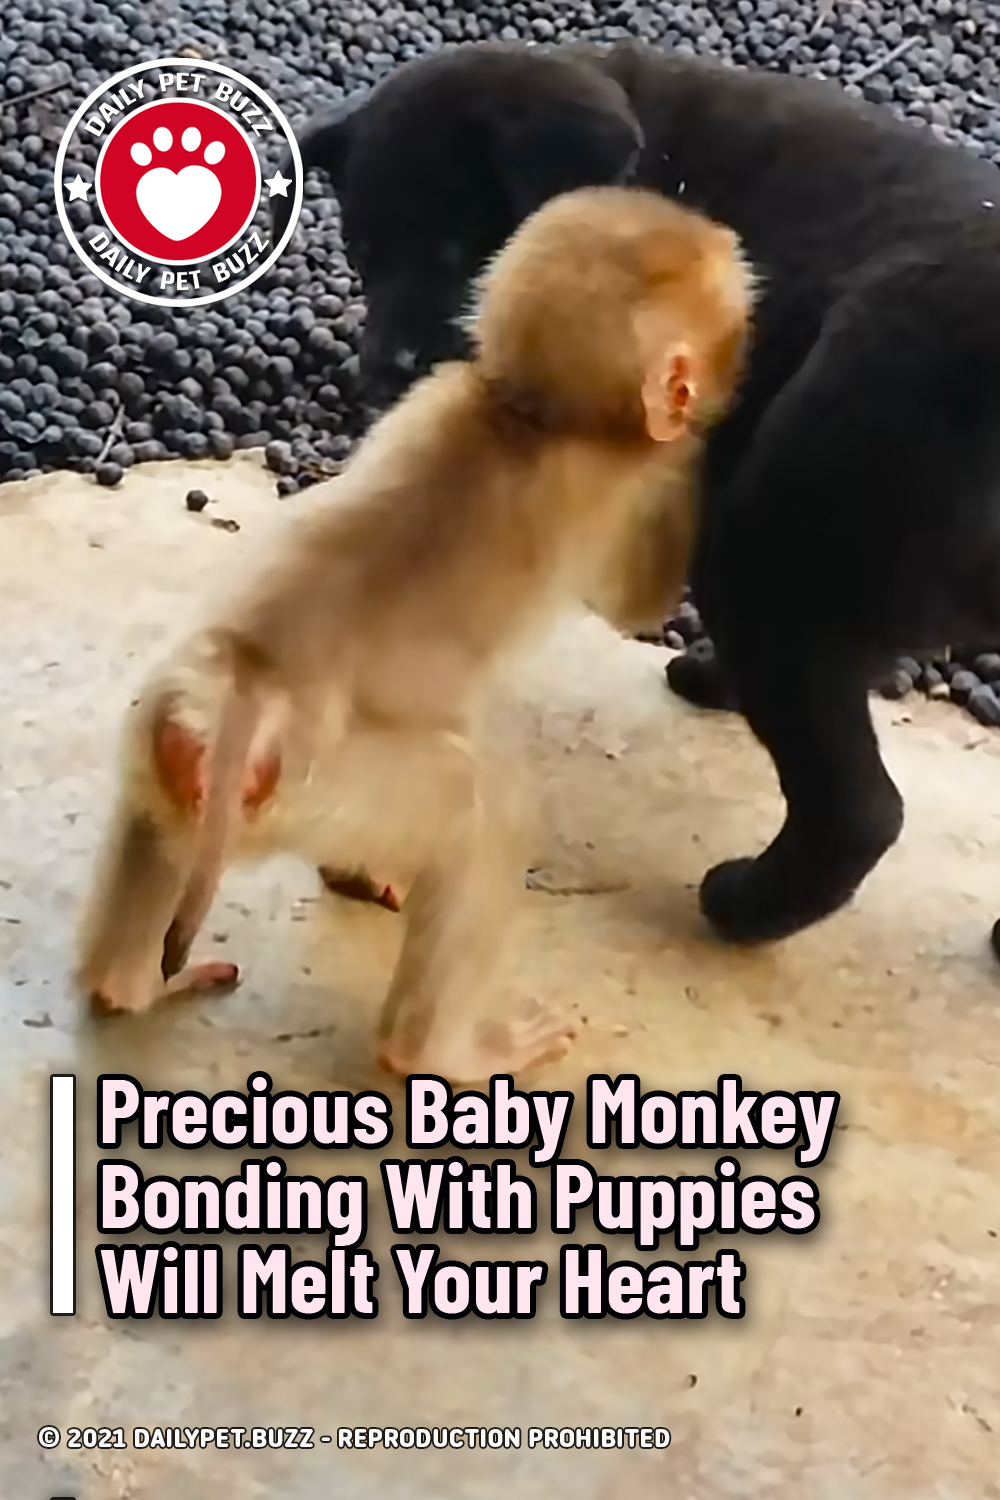 Precious Baby Monkey Bonding With Puppies Will Melt Your Heart